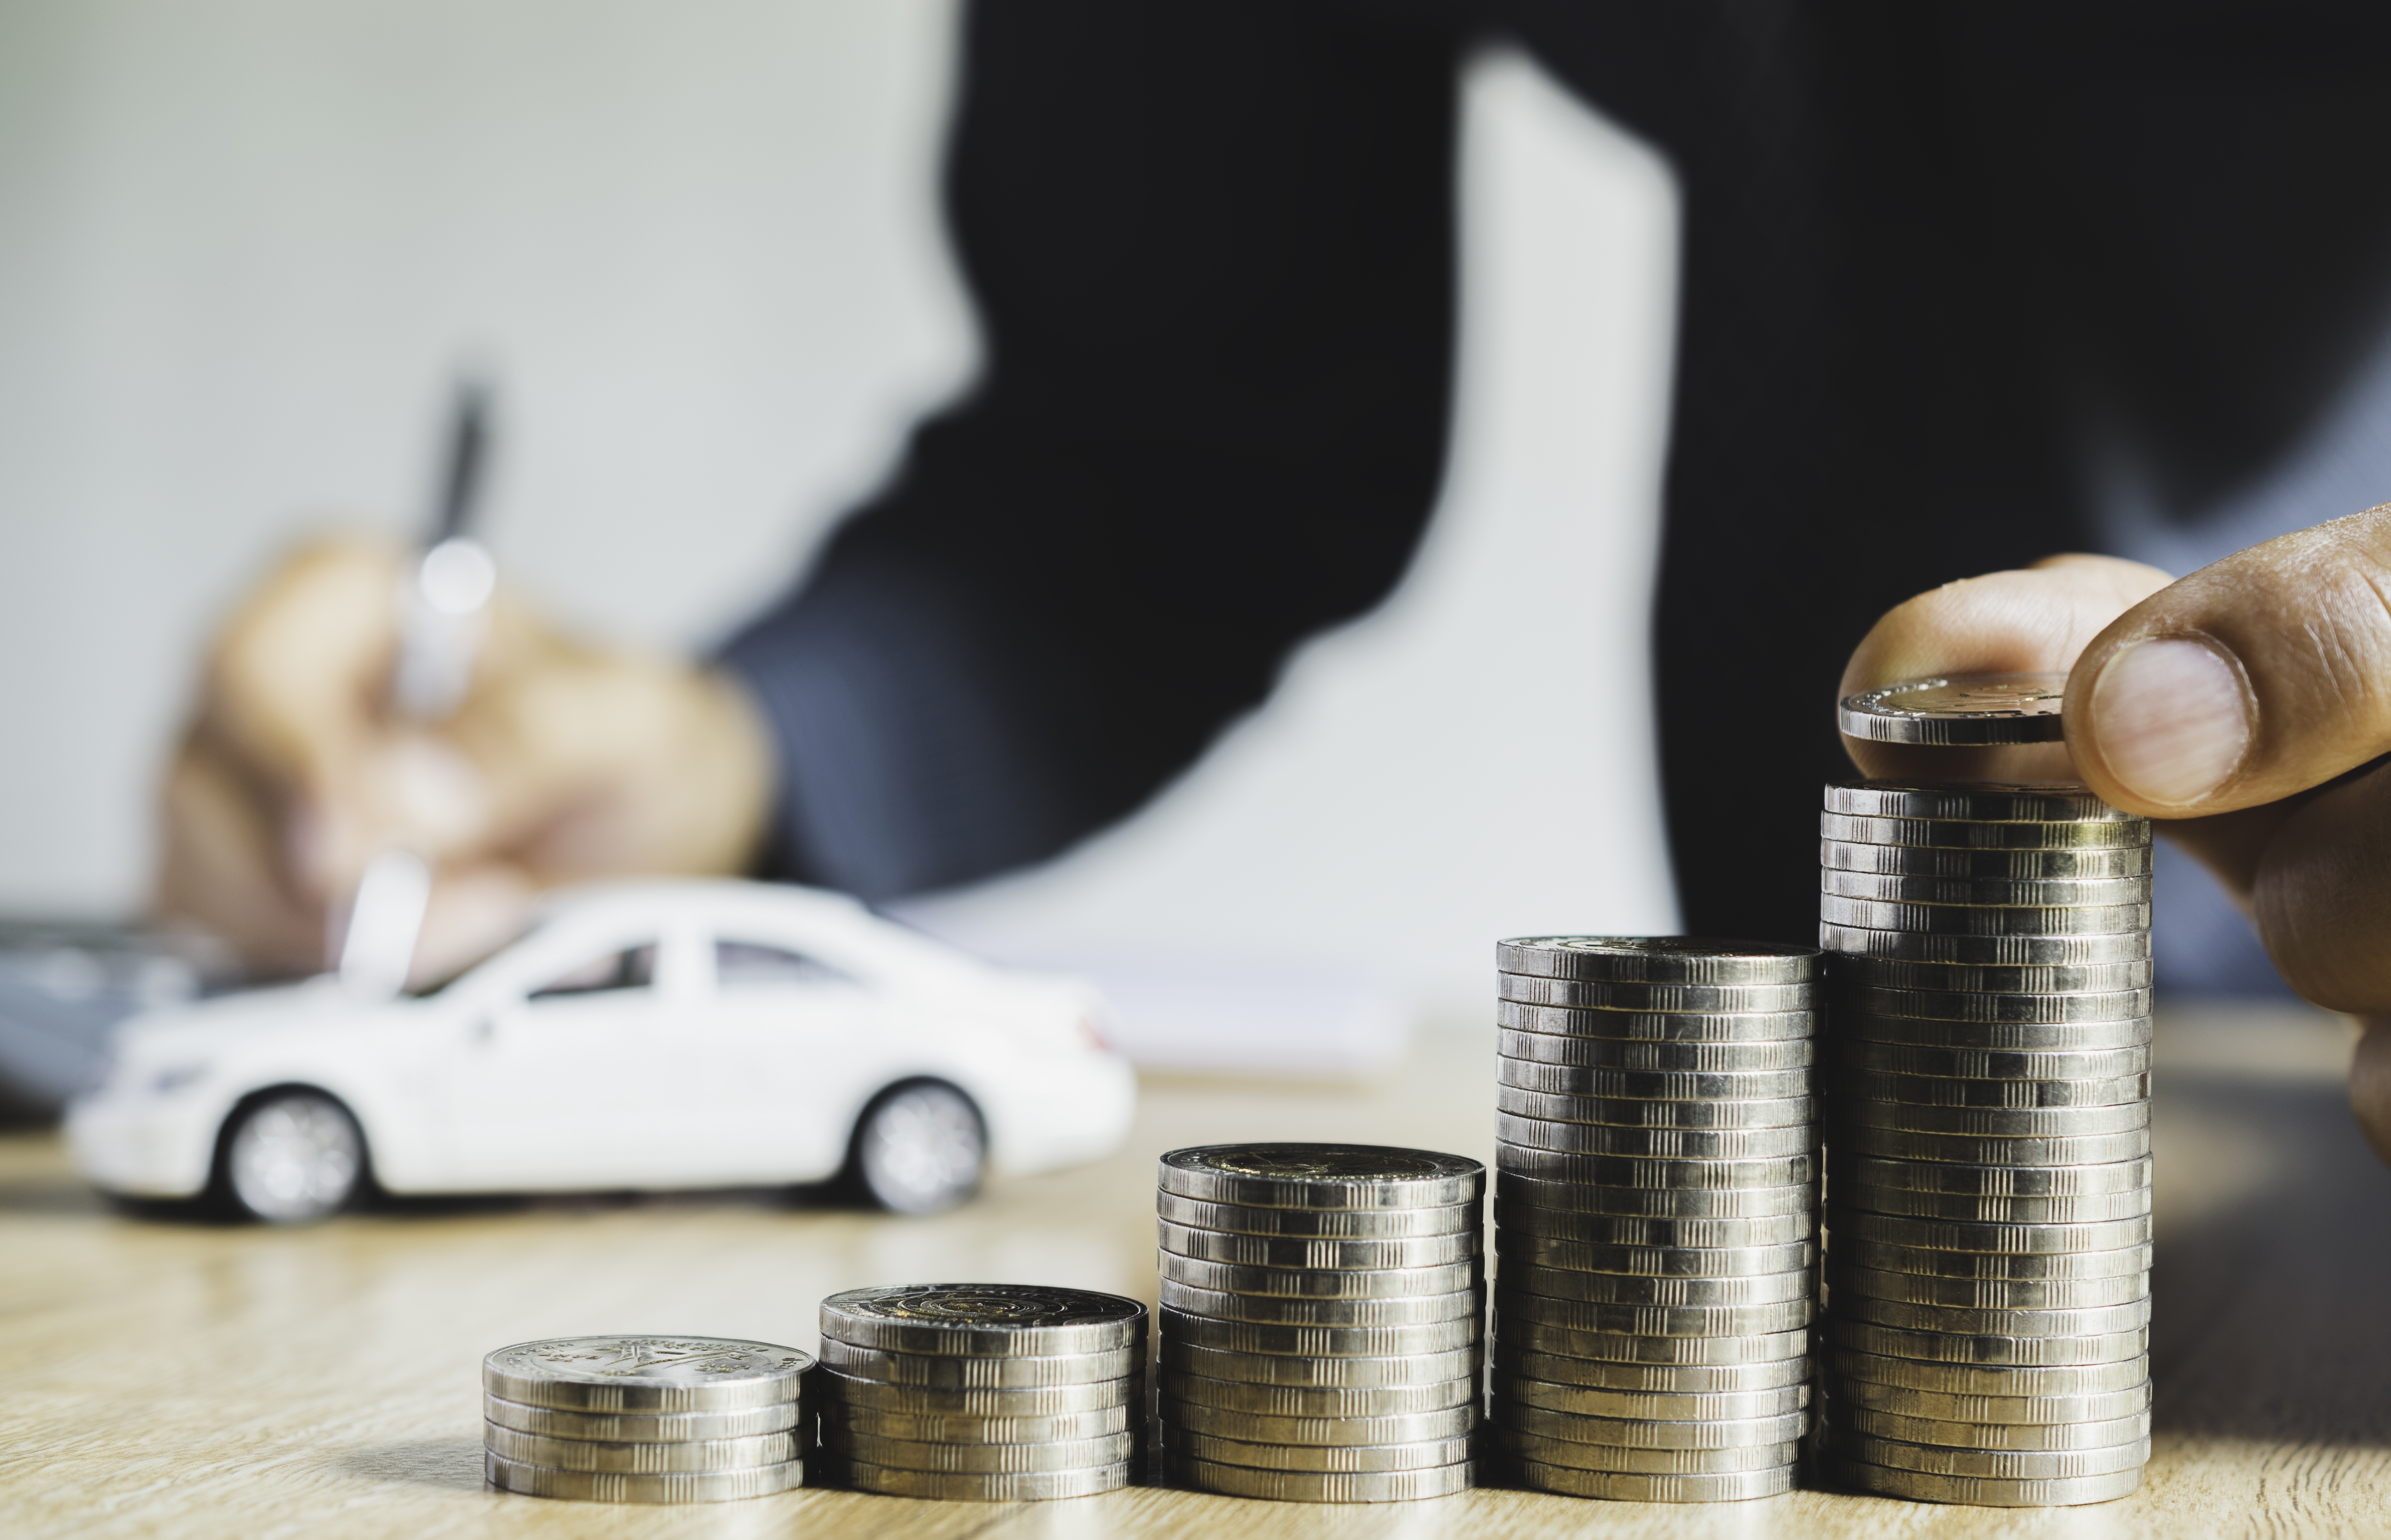 Brits are likely due "billions" in compensation over dodgy car finance deals, a lawyer has claimed